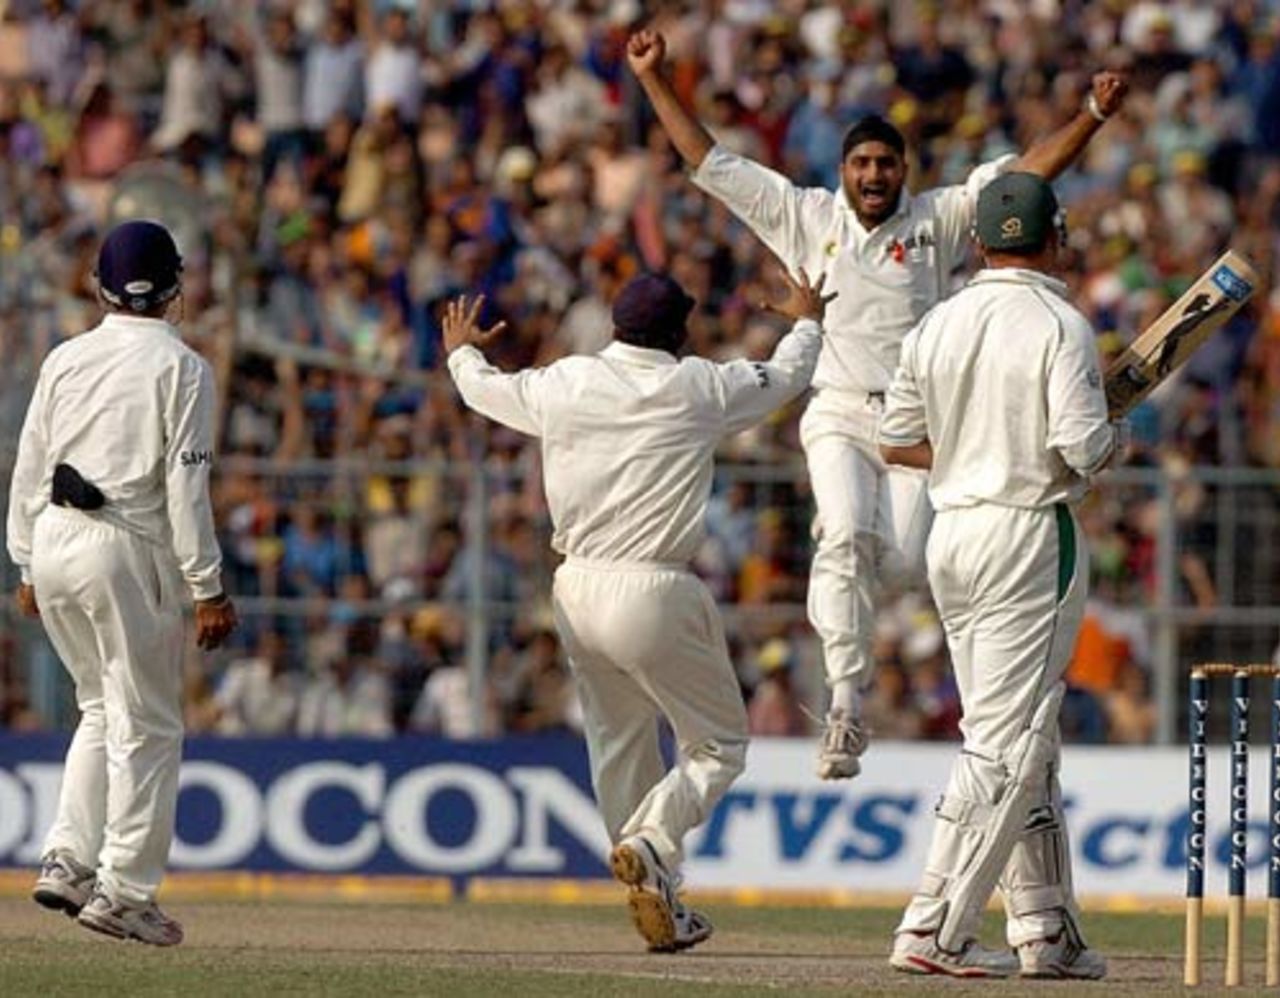 Harbhajan Singh and the Indian close-in fielders celebrate, convinced that Jacques Kallis is out. Daryl Harper, however, turned down the appeal, India v South Africa, 2nd Test, Eden Gardens, December 1, 2004